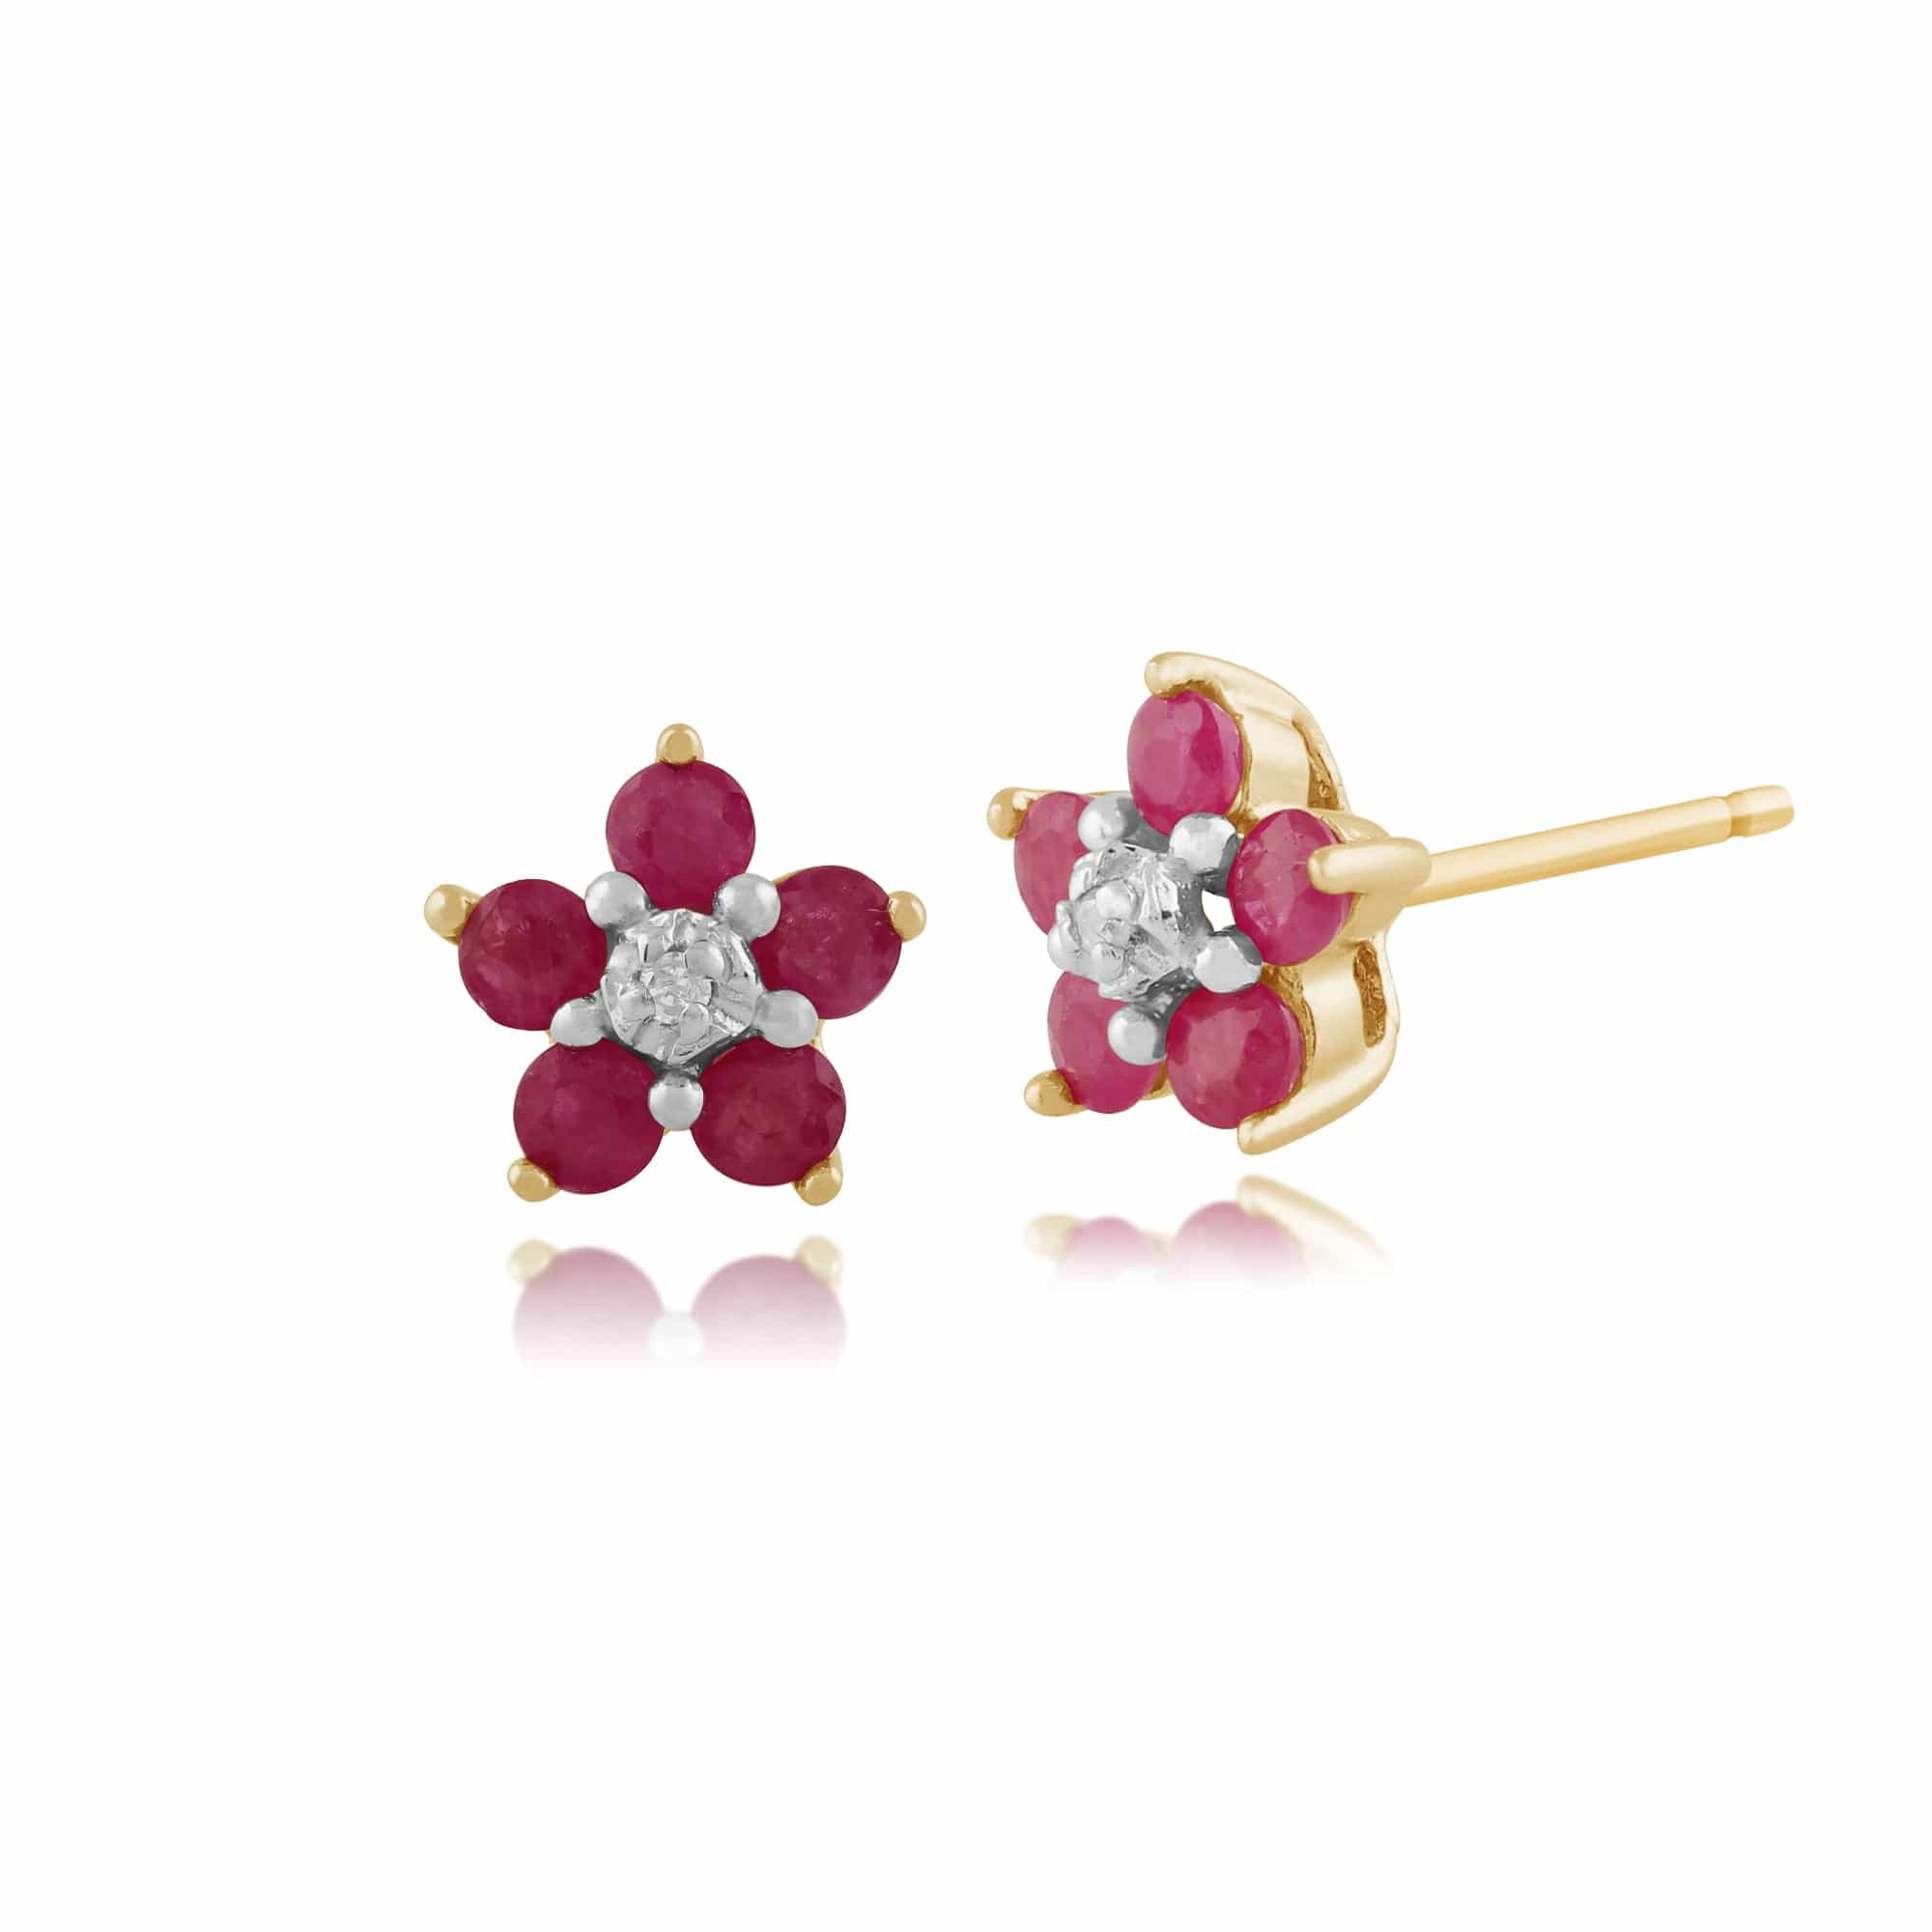 Floral Round Ruby & Diamond Cluster Stud Earrings in 9ct Yellow Gold - Gemondo